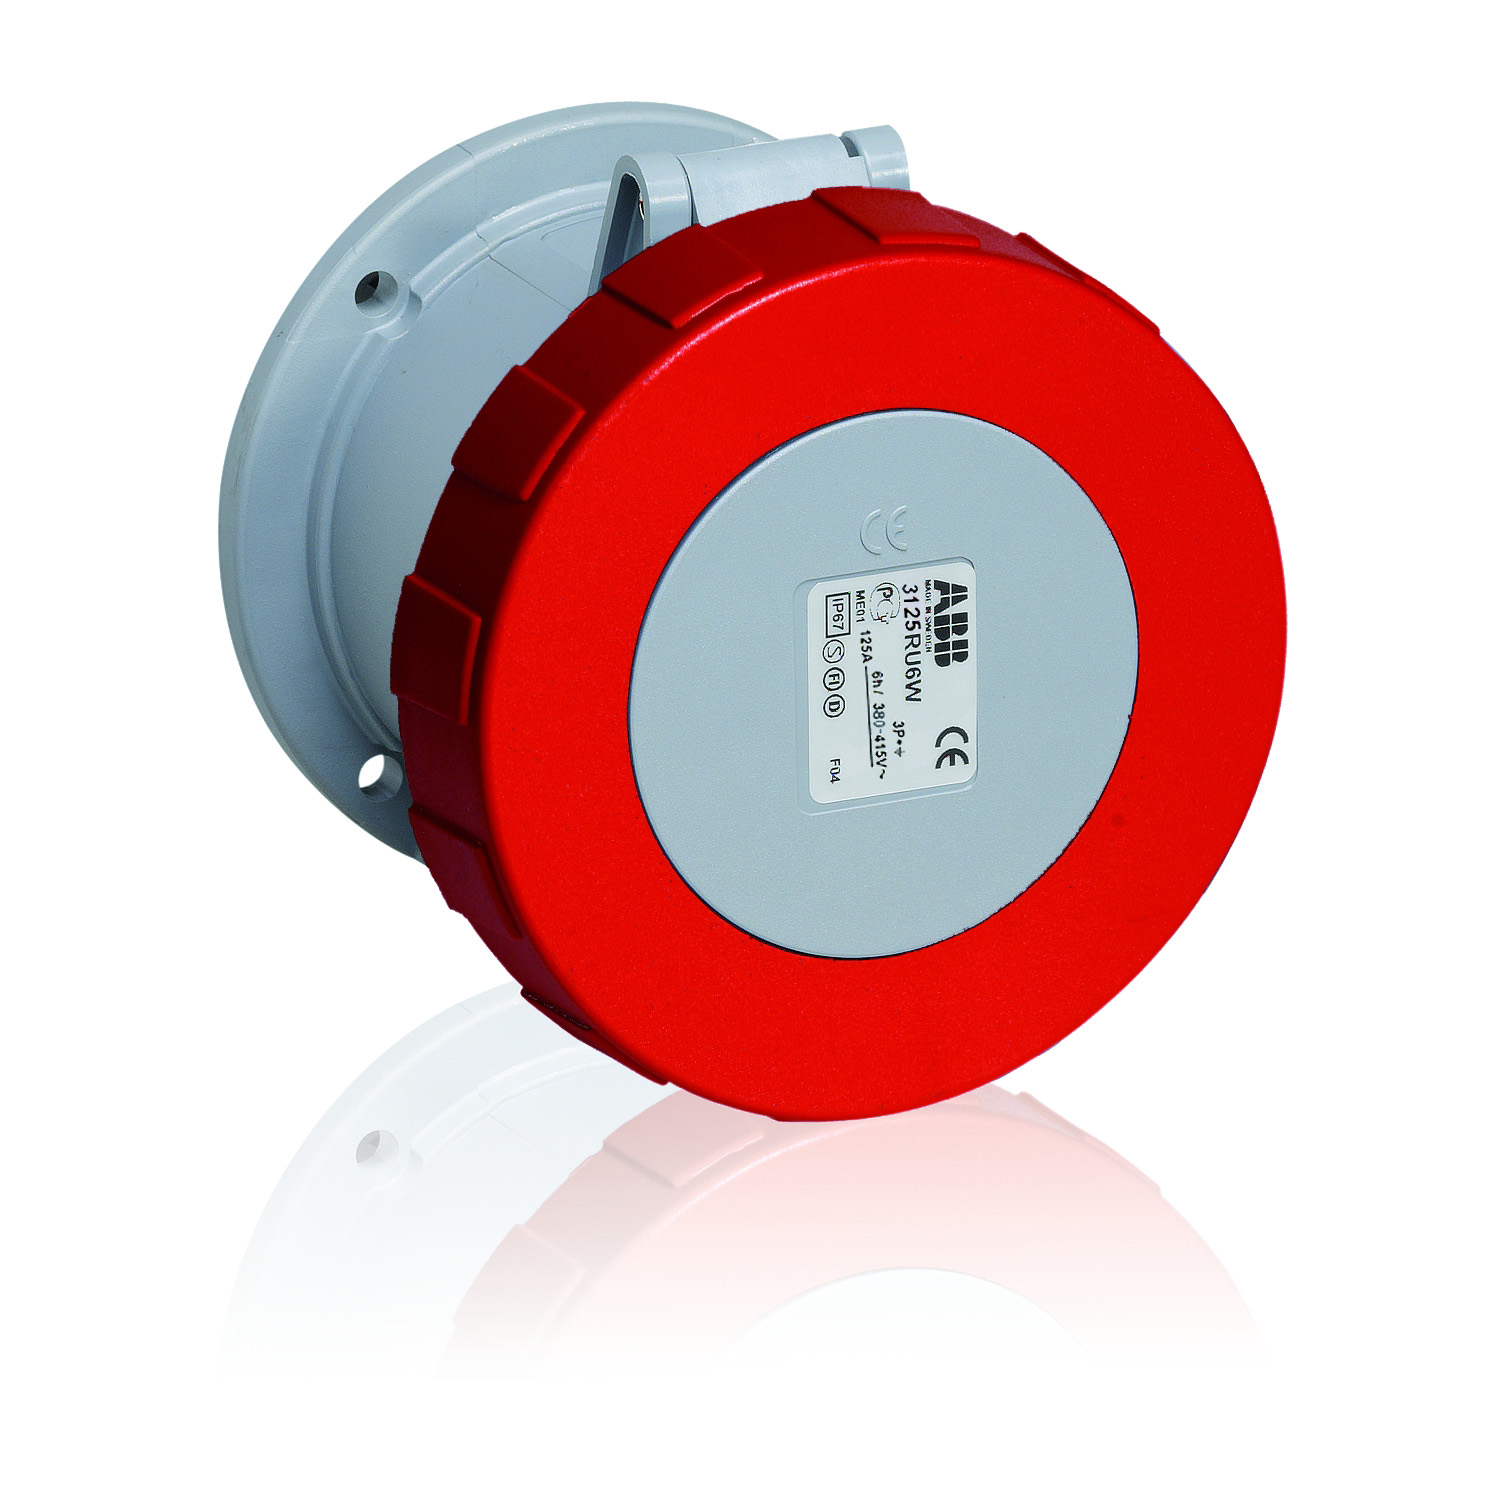 ABB ABB4100R9W Pin and Sleeve Receptacle